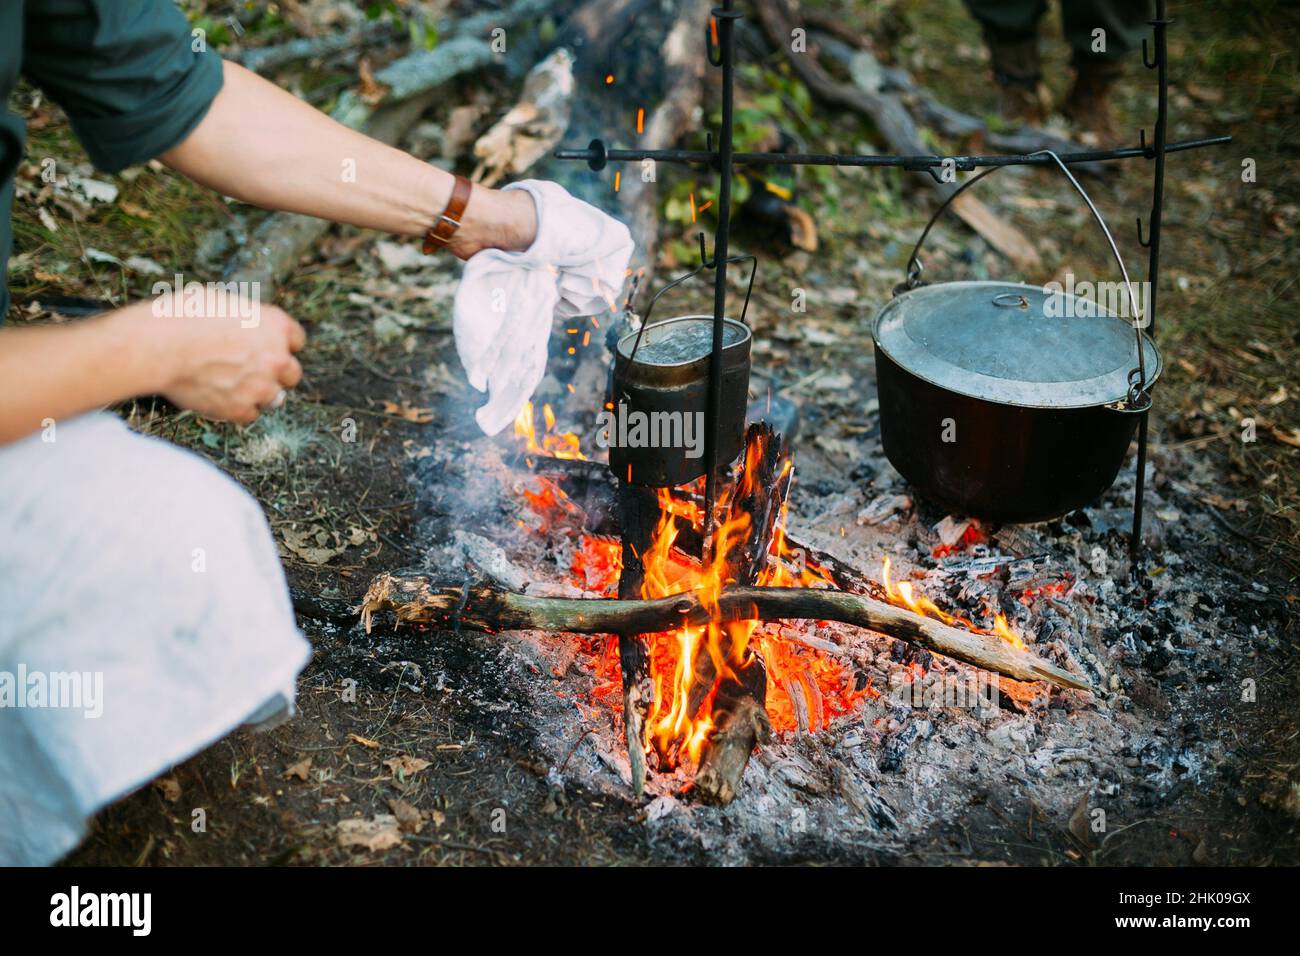 Food Is Cooked Over A Fire In An Old Marching Pot. Stock Photo